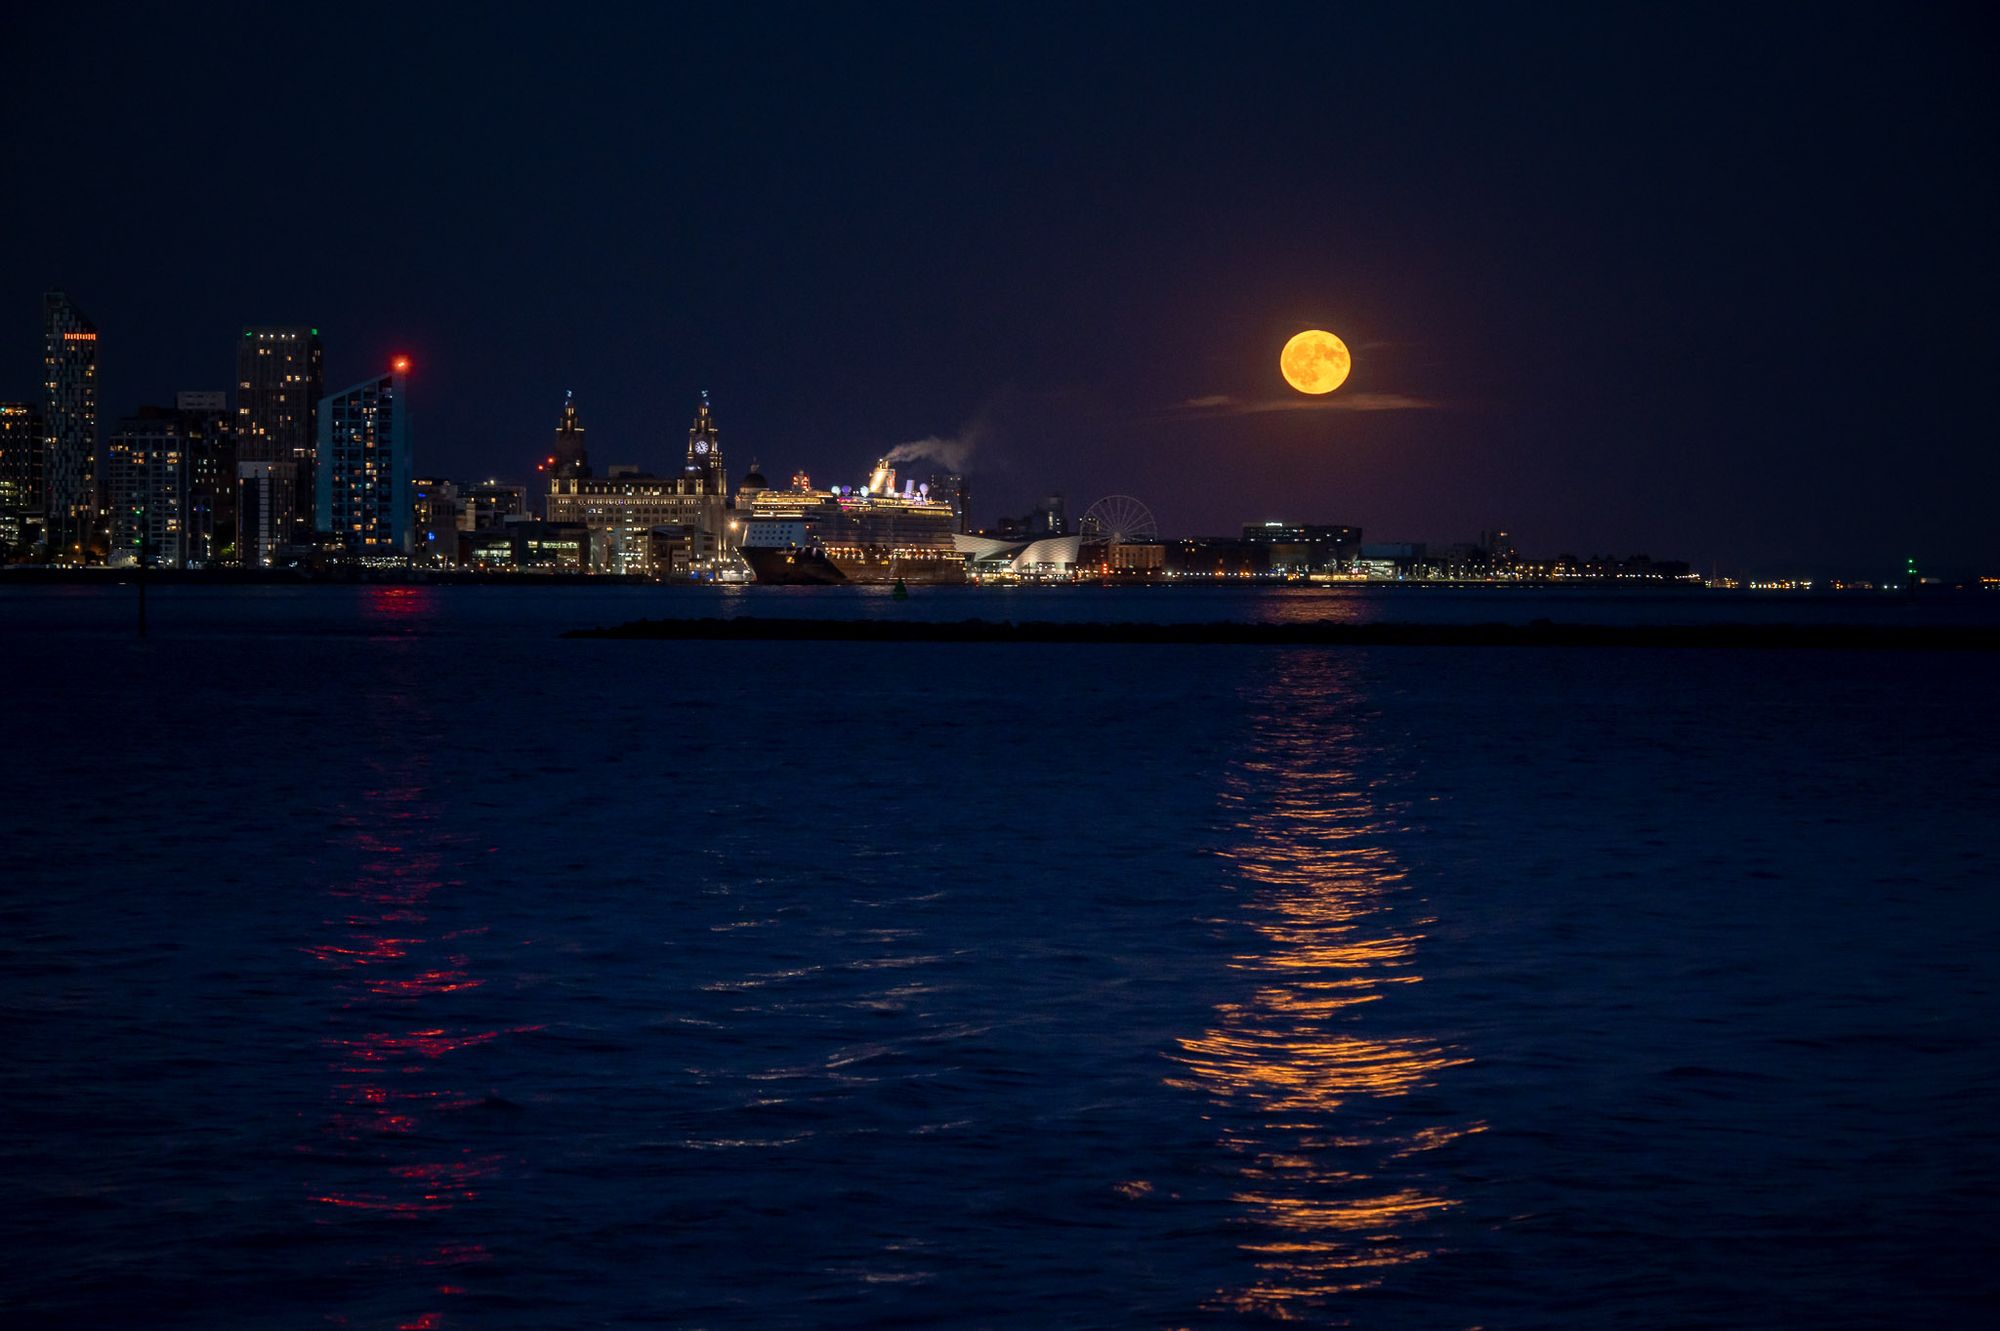 A Strawberry super moon rises to the right of the Liverpool skyline.